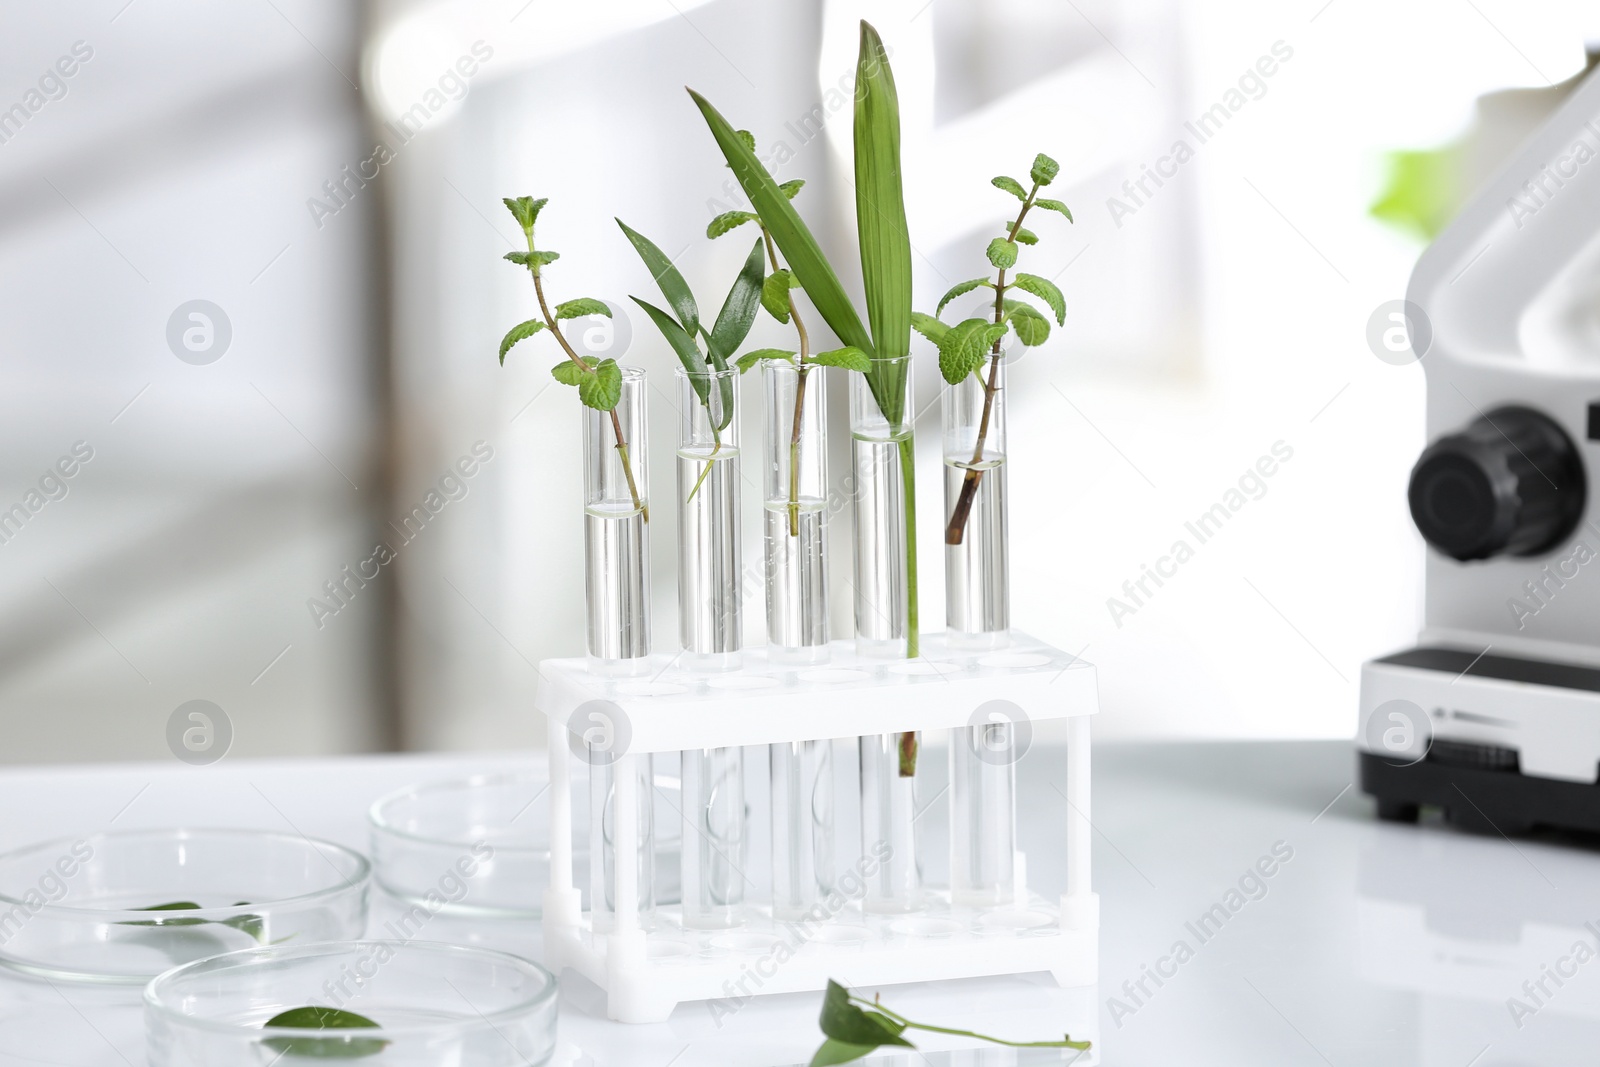 Photo of Laboratory glassware with different plants on table against blurred background. Chemistry research